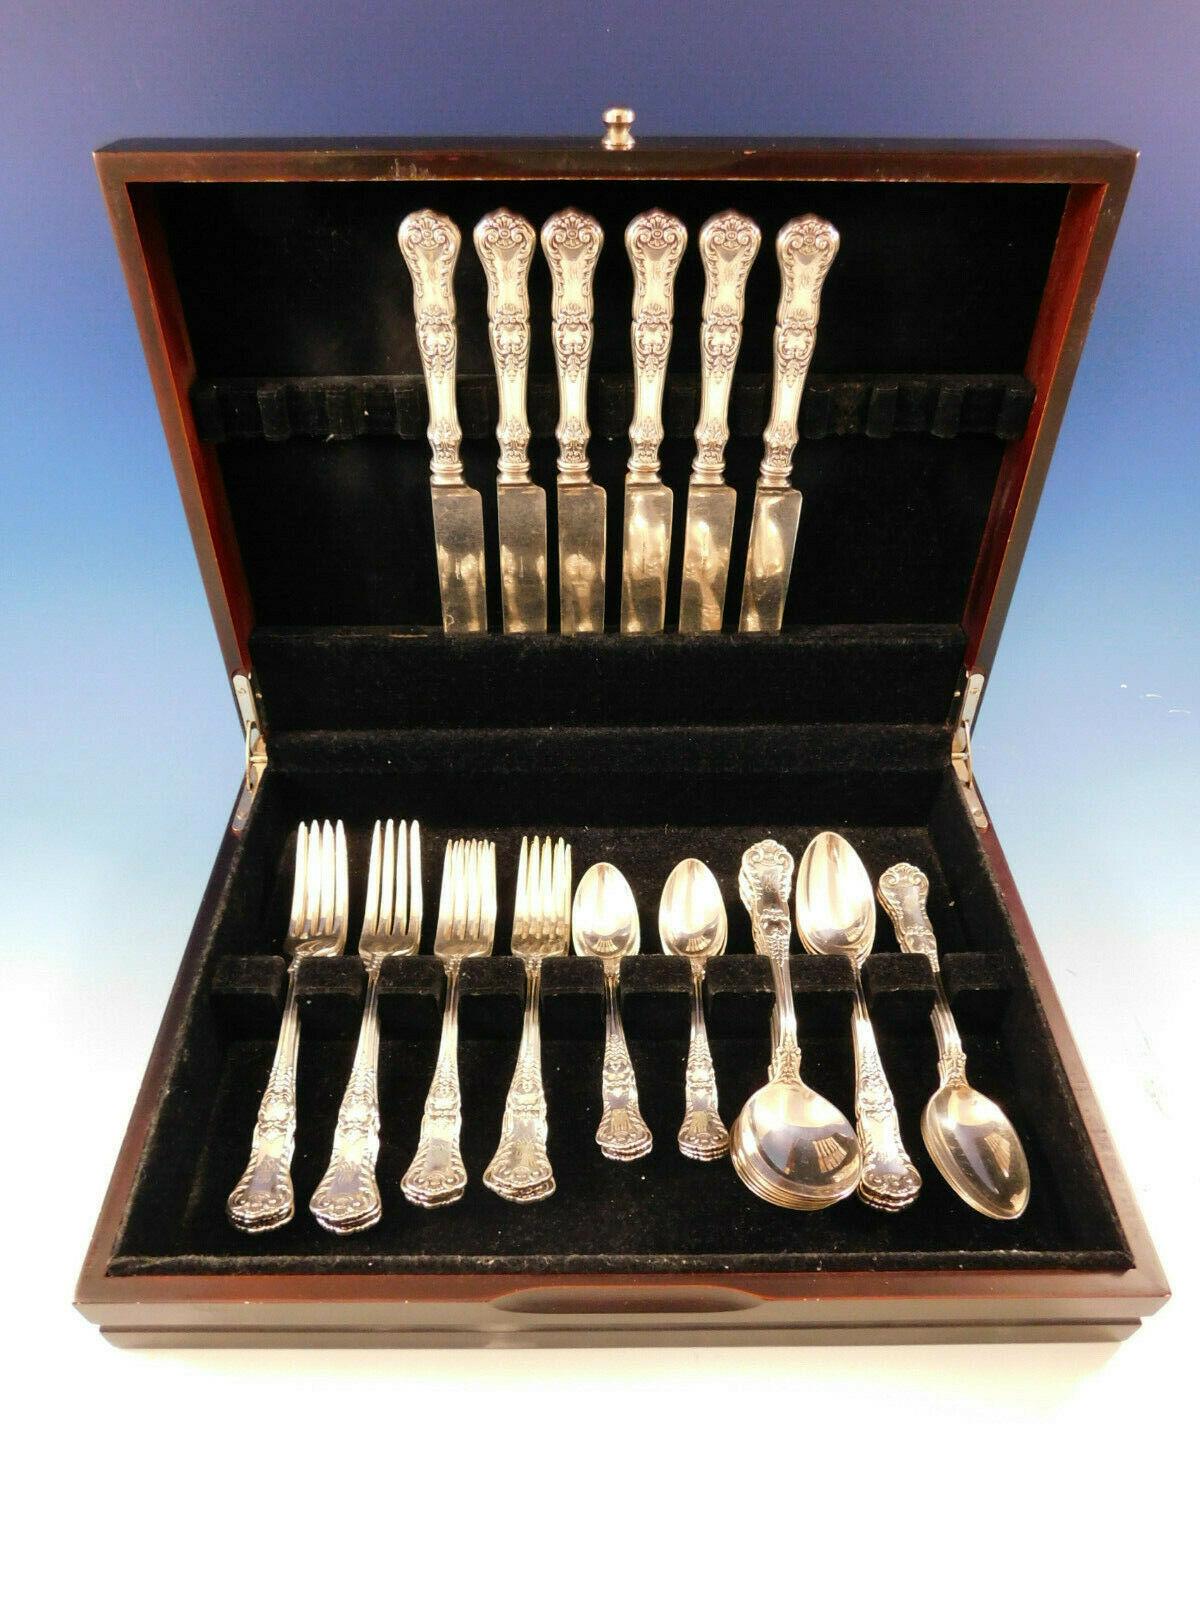 Rare early dinner size Lady Caroline by Gorham circa 1897 silver plated flatware set, 36 pieces. This set includes:

6 dinner size knives with plated blunt blades, 9 3/4